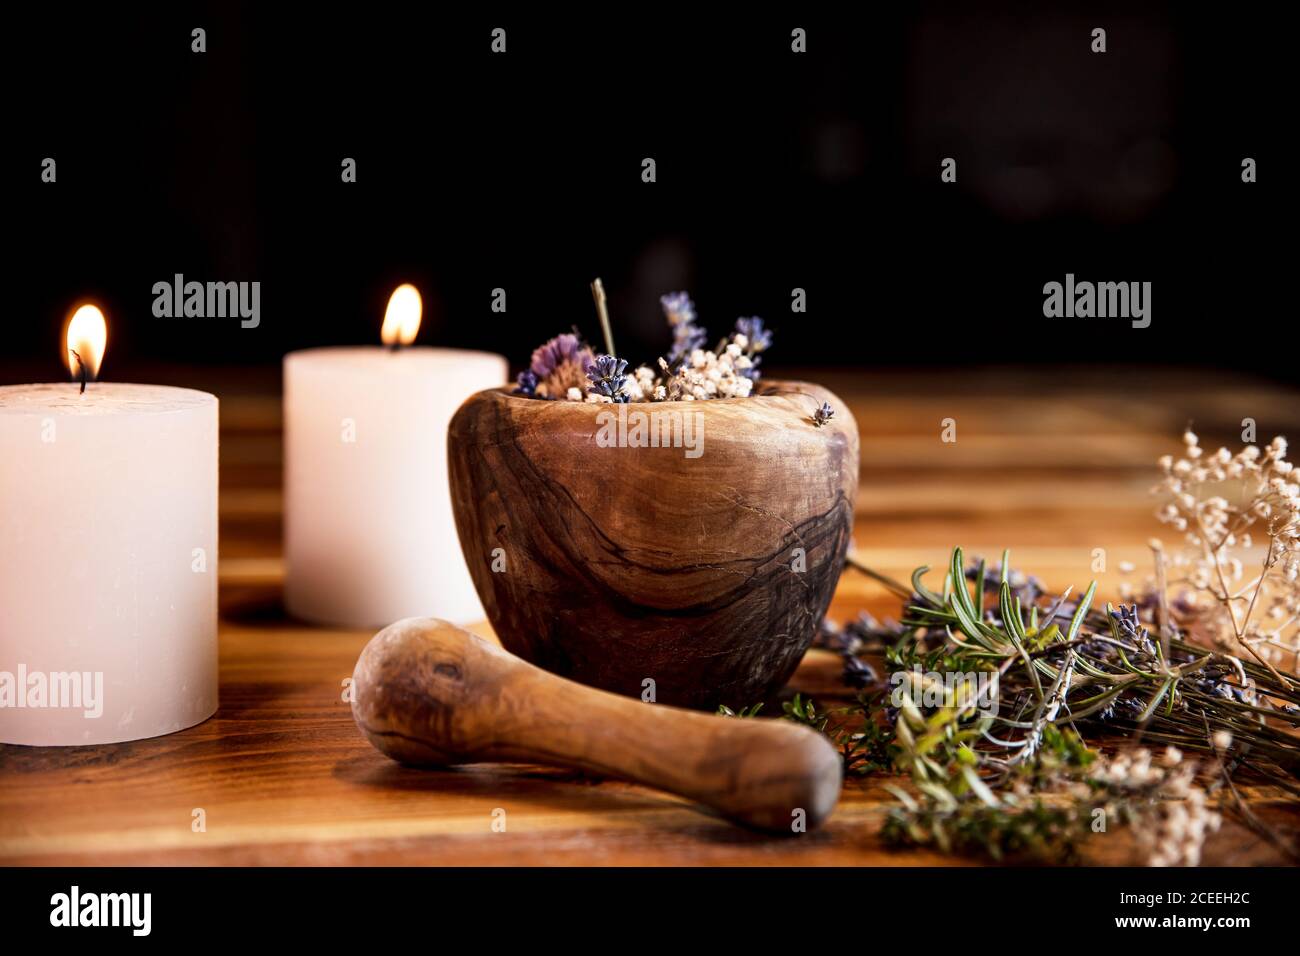 Mortar with dried healing herbs, flowers and candles, ritual purification and cleansing, copyspace Stock Photo